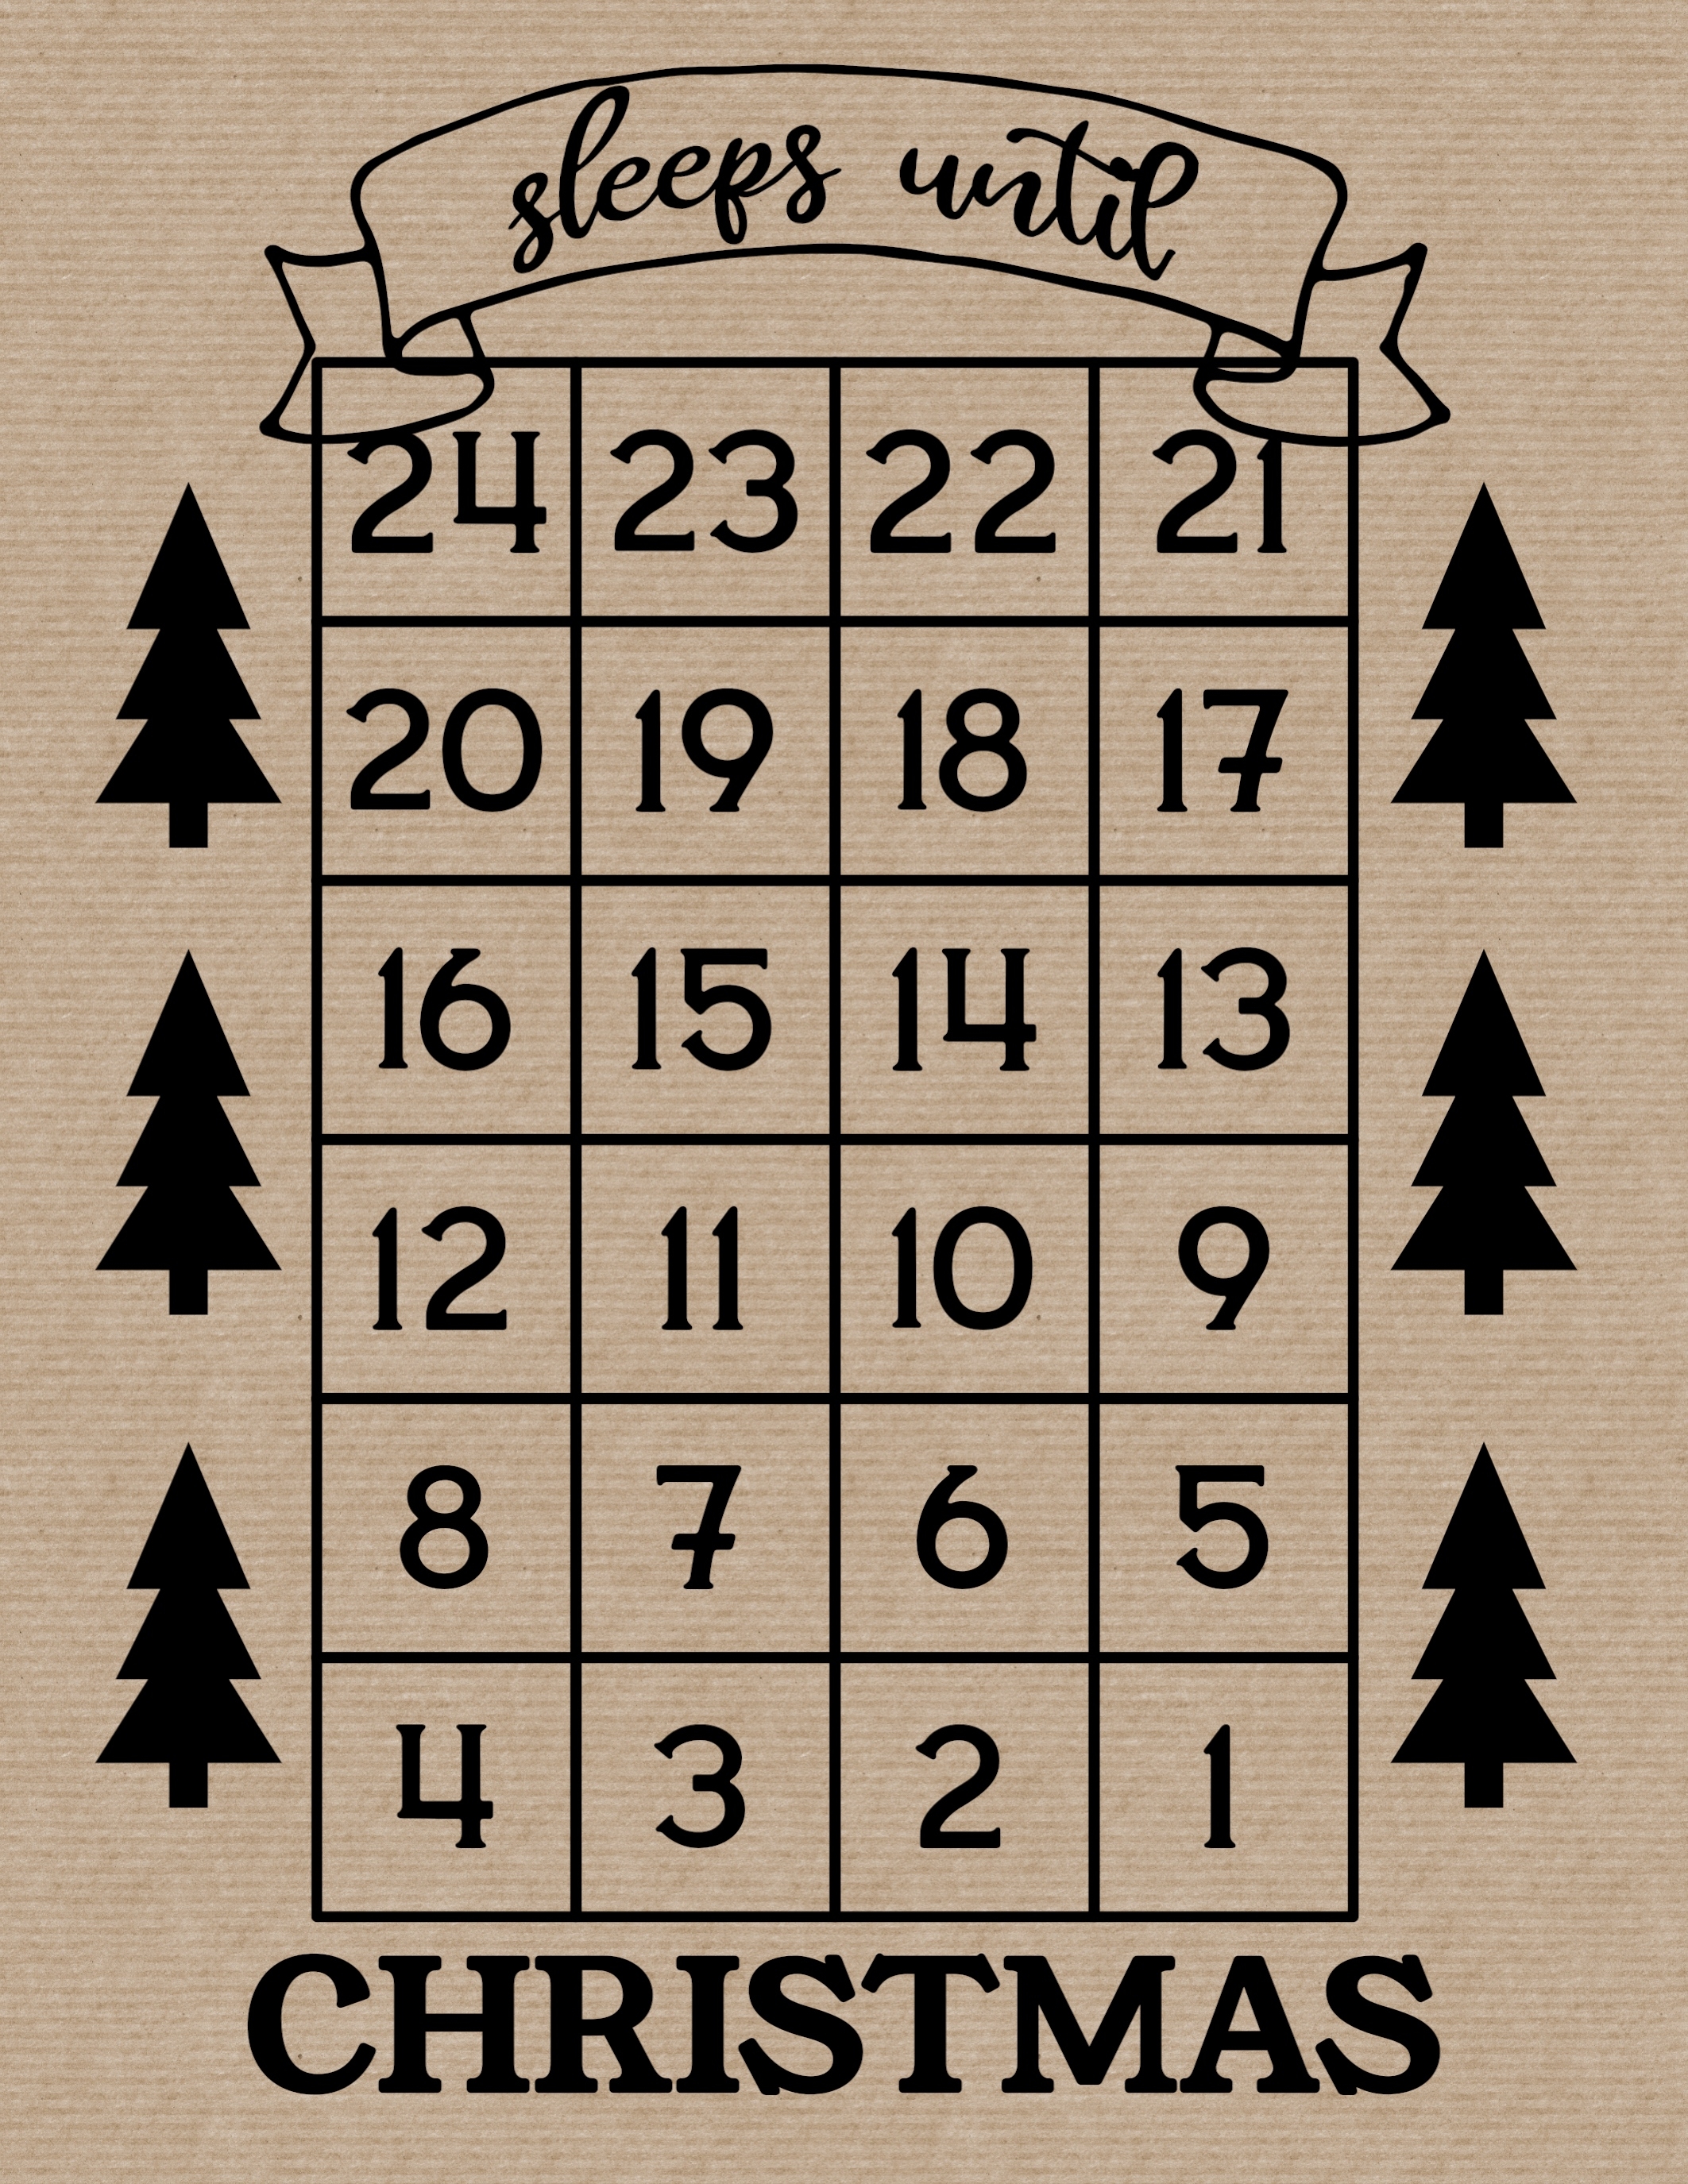 How Many Days Until Christmas Free Printable - Paper Trail Countdown Claende To Print Off